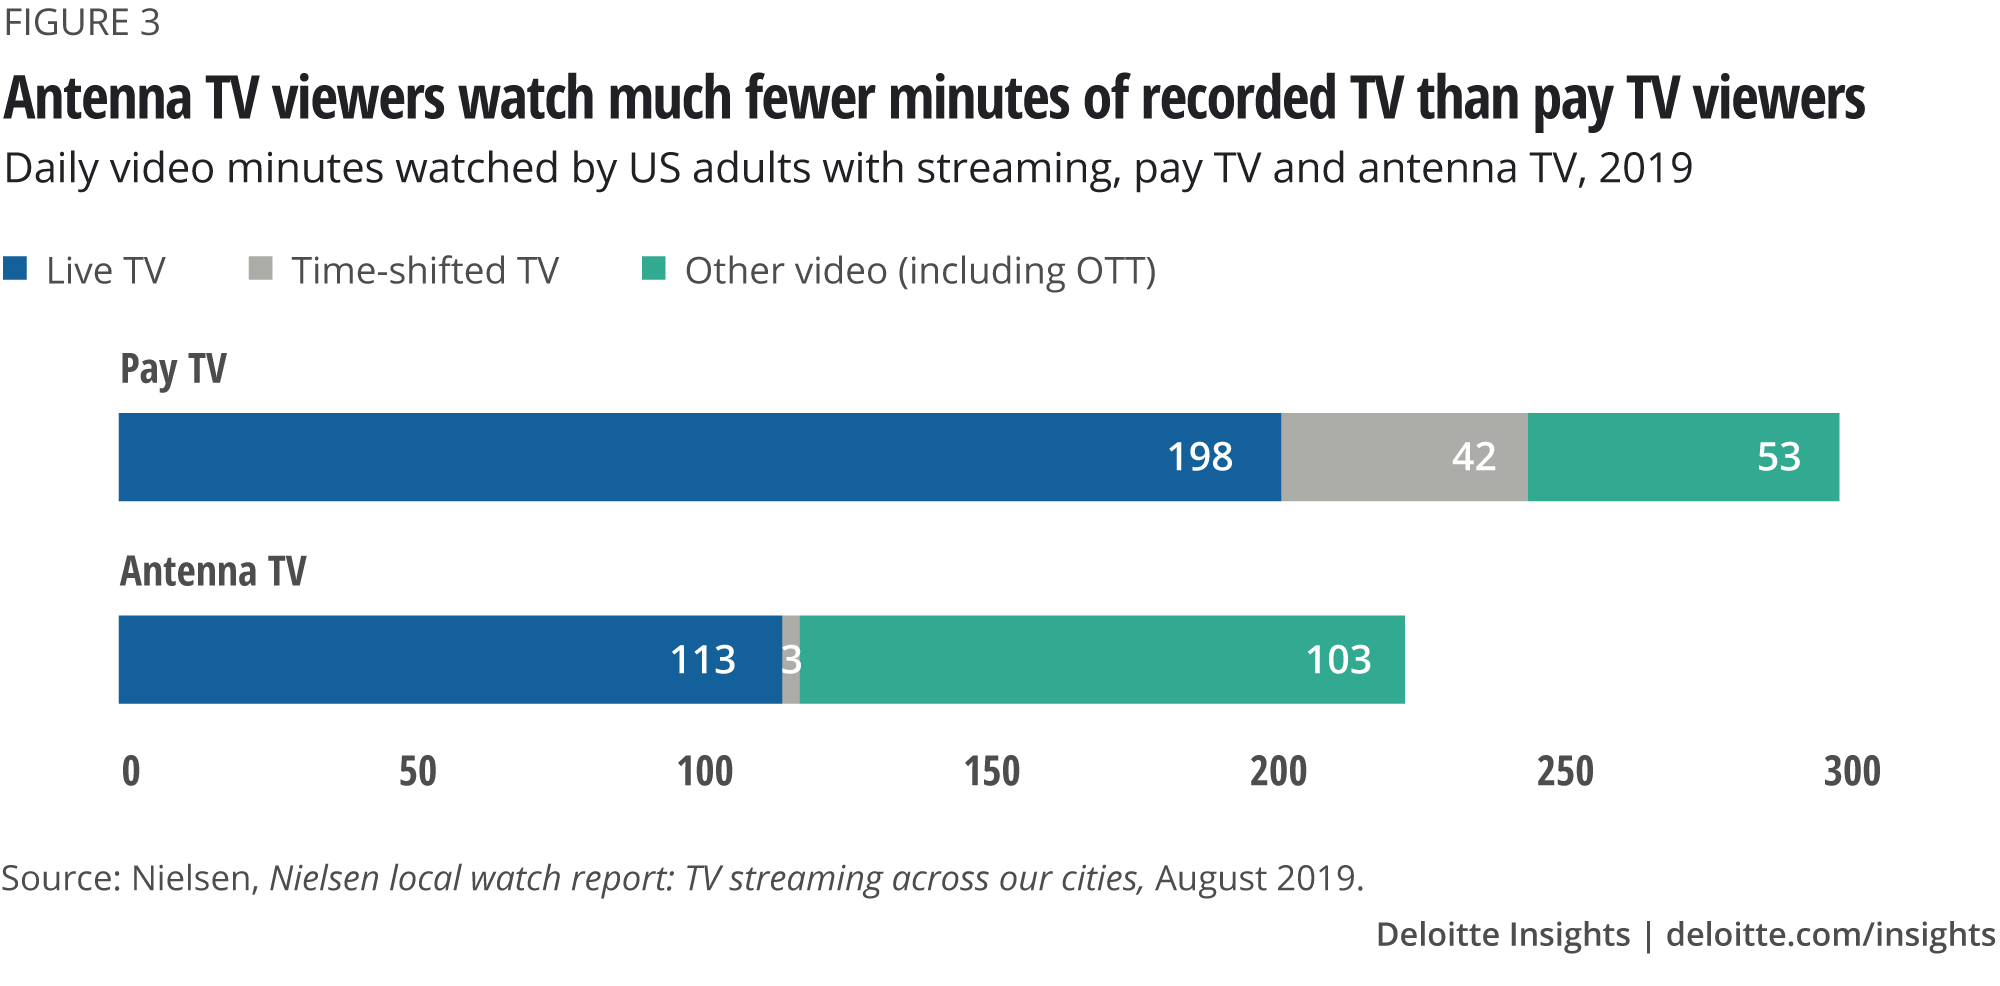 Antenna TV viewers watch much fewer minutes of recorded TV than pay TV viewers